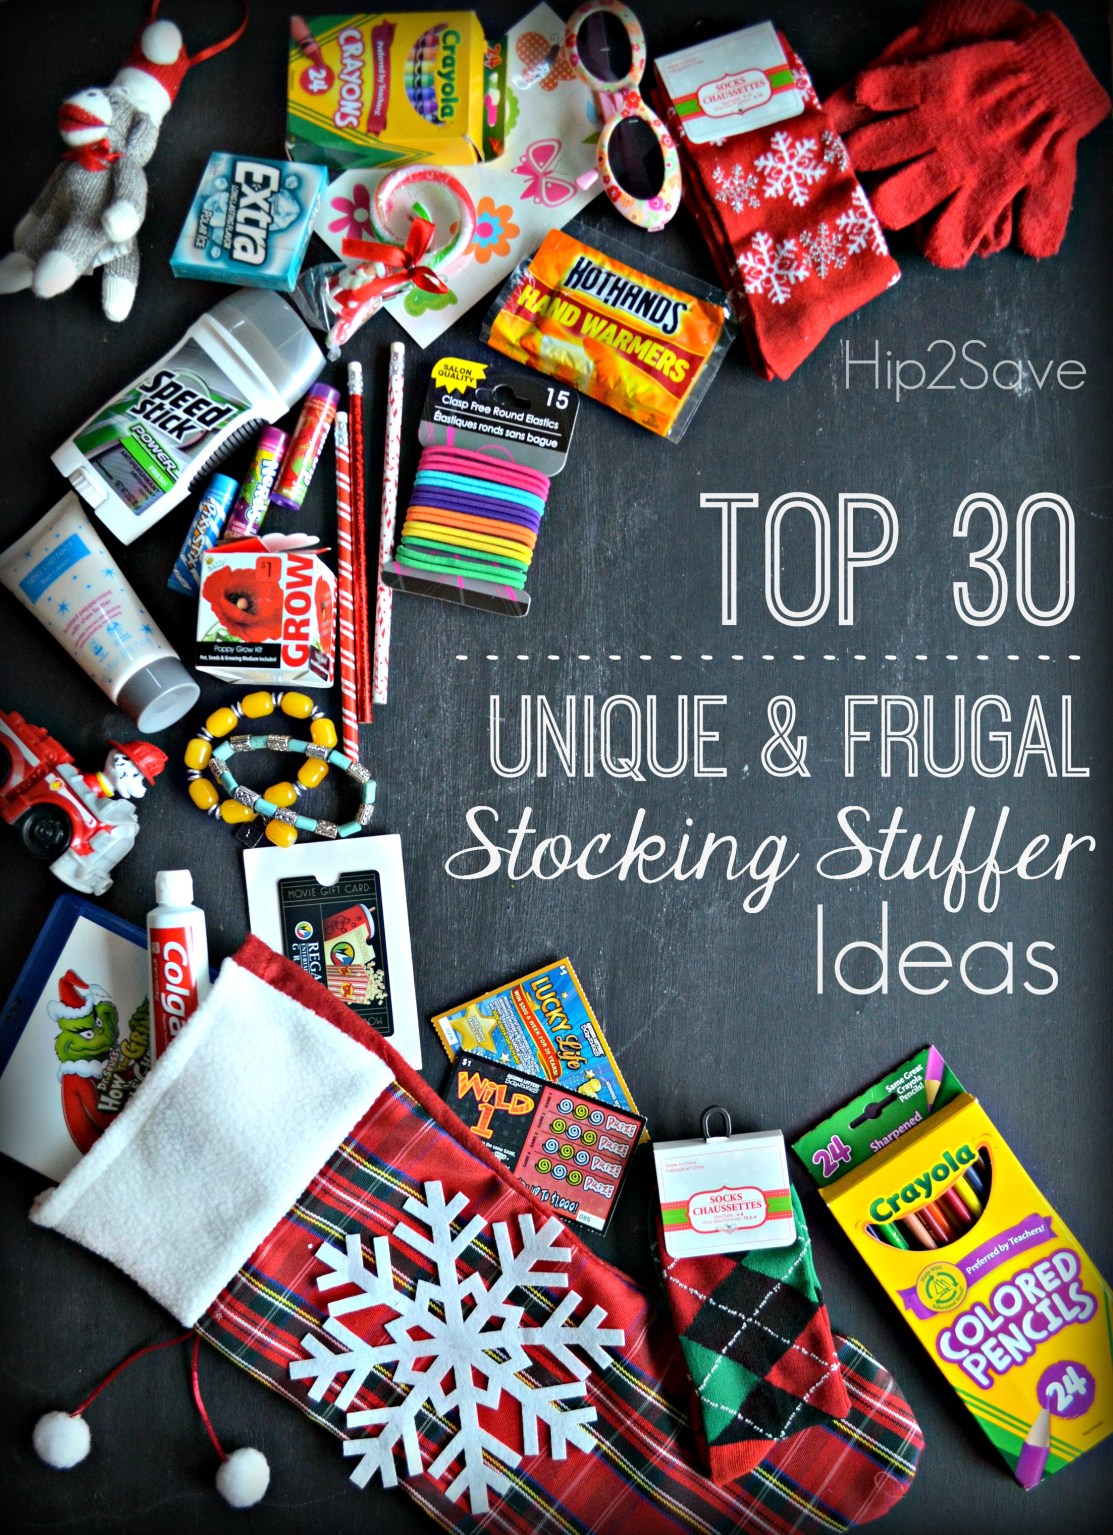 Top 30 Unique And Frugal Stocking Stuffer Ideas